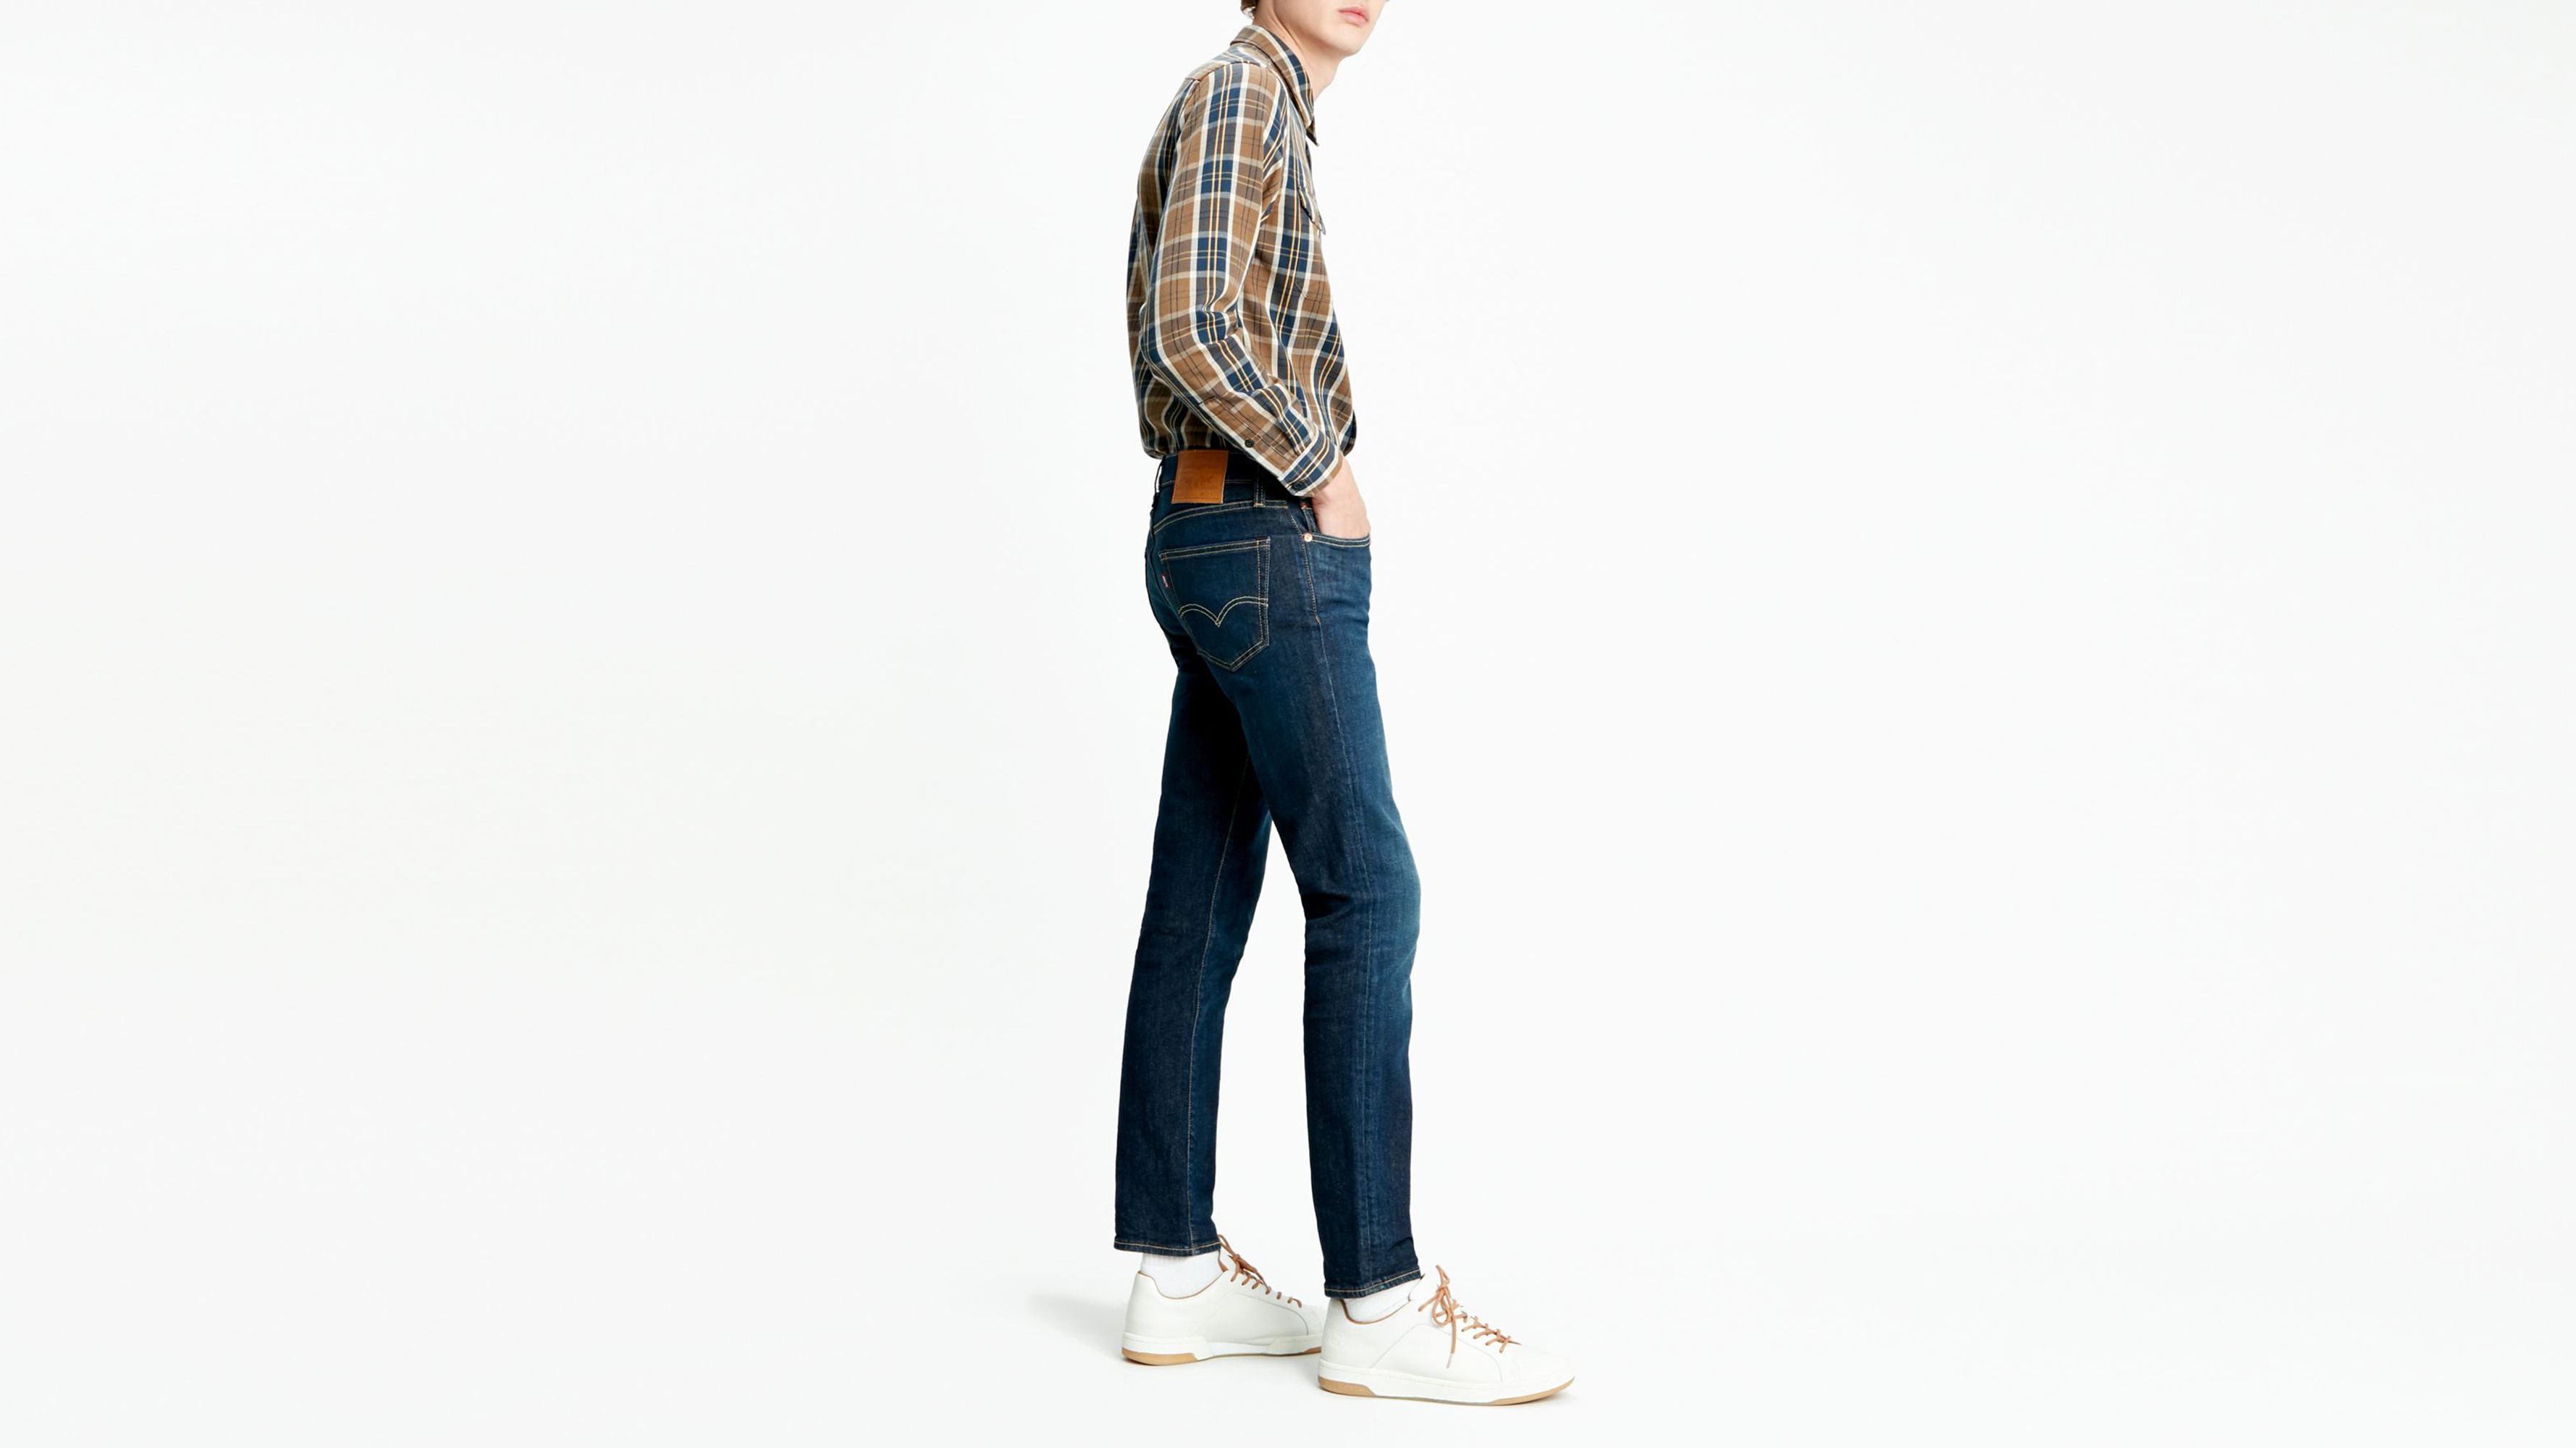 levis mens clothing